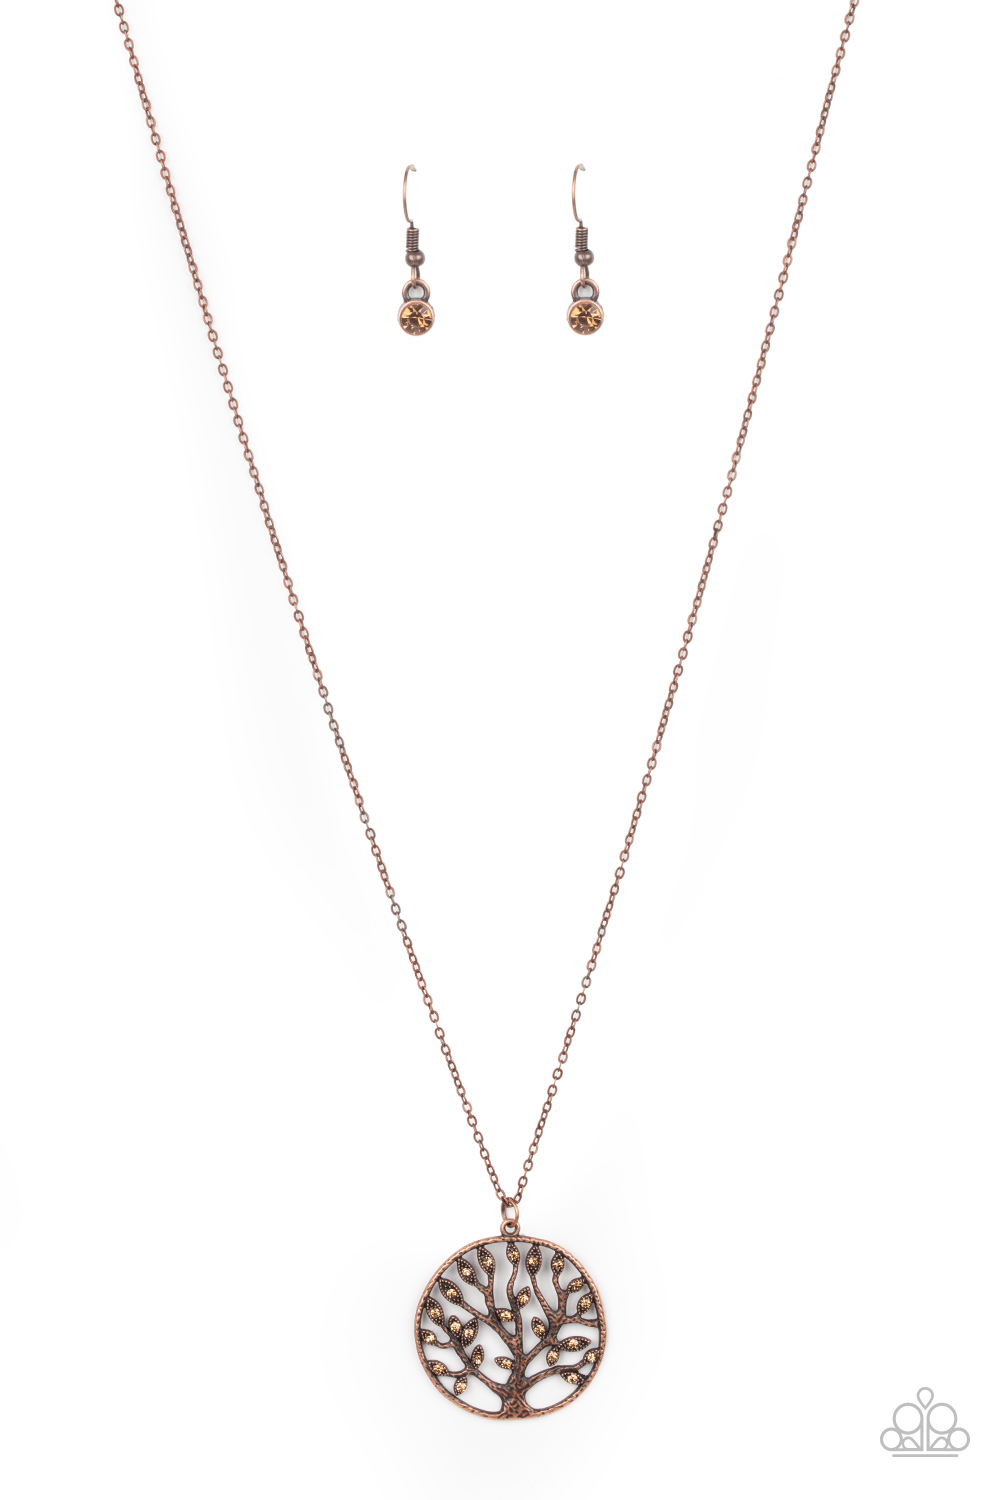 Necklace - Save The MONEY Trees - Copper